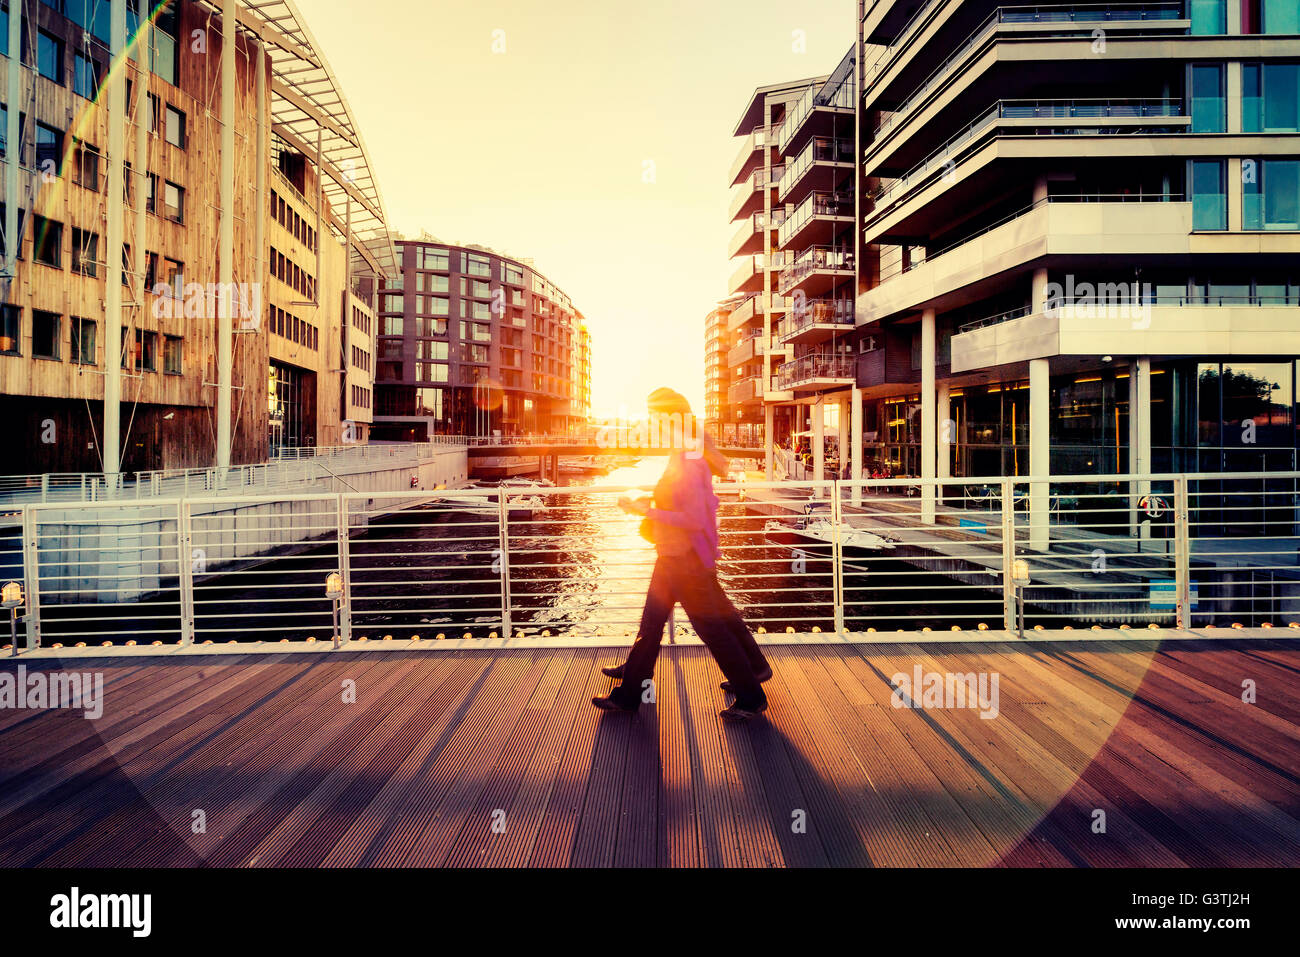 Norway, Oslo, Aker Brygge, Pedestrians on city bridge silhouetted against setting sun Stock Photo